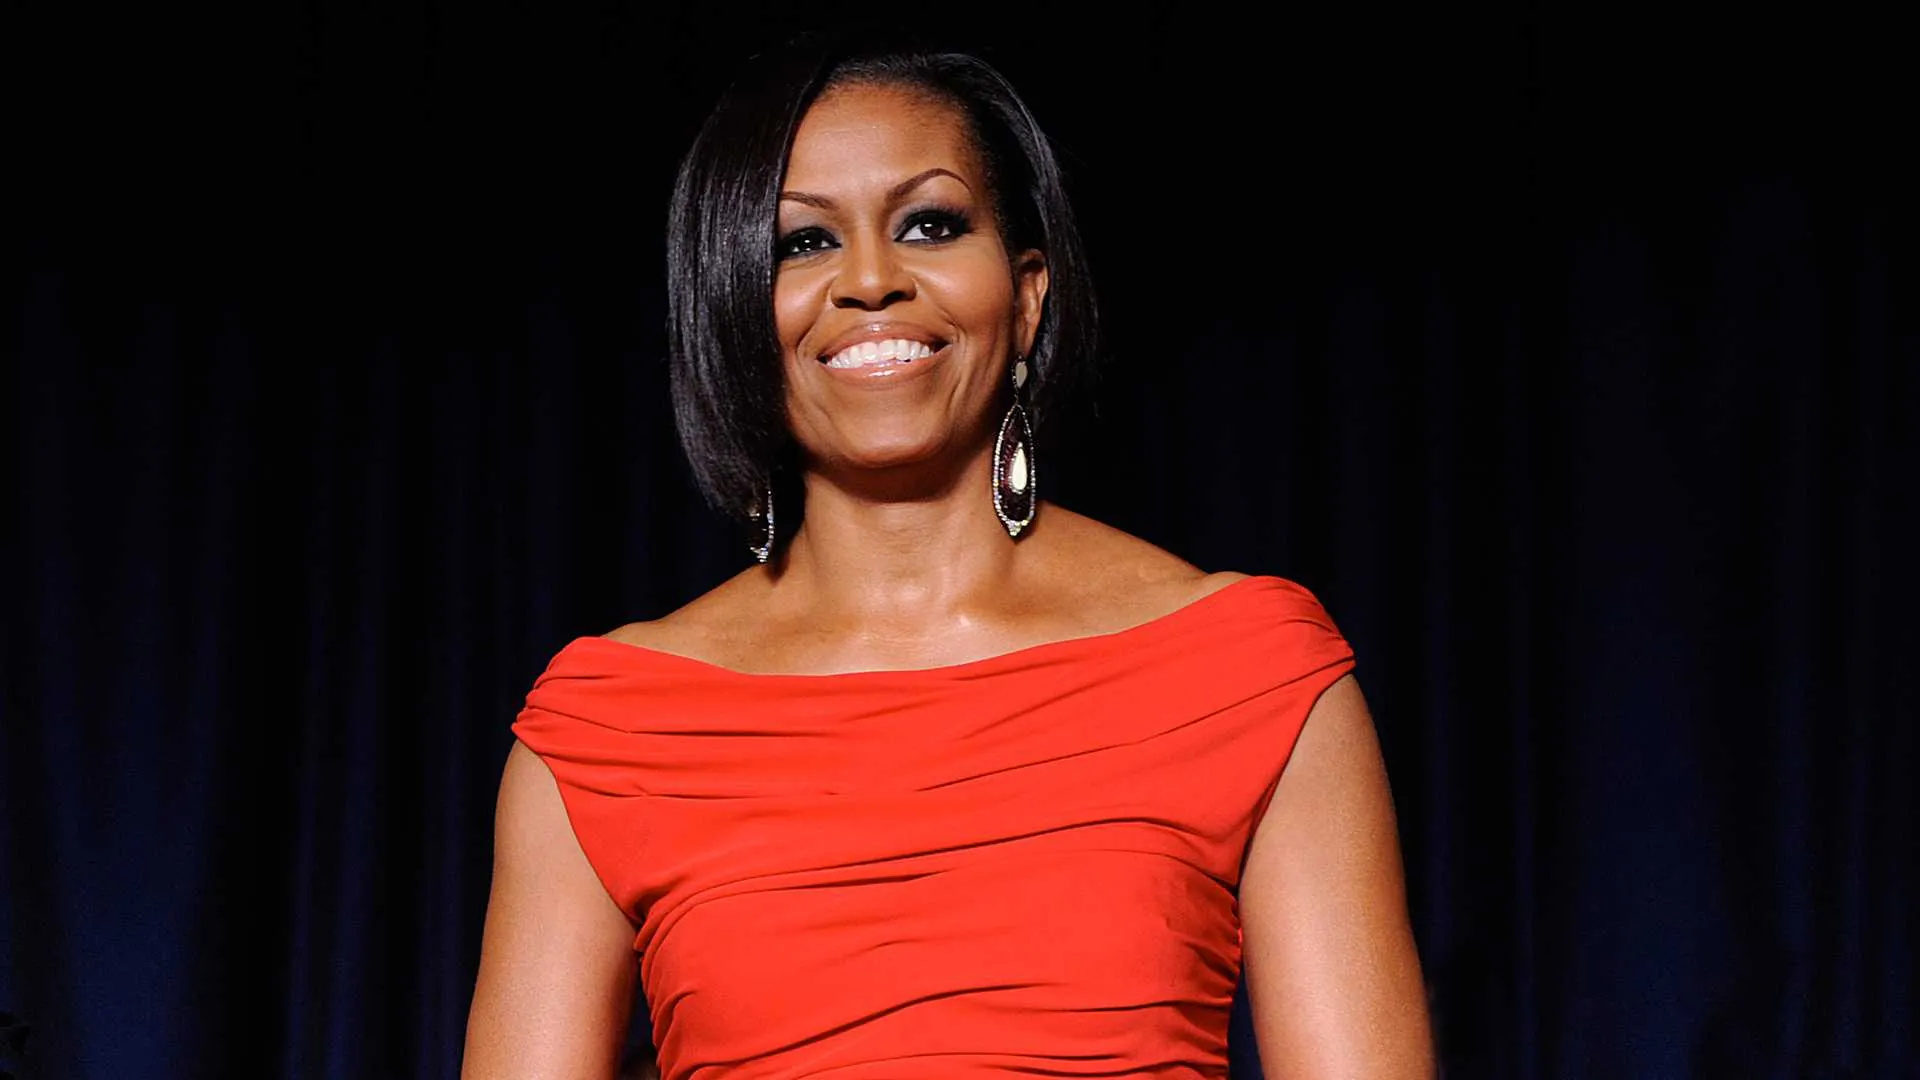 Michelle Obama: Established the ‘Let’s move’ program which aimed to end childhood obesity. 1920x1080 Full HD Wallpaper.